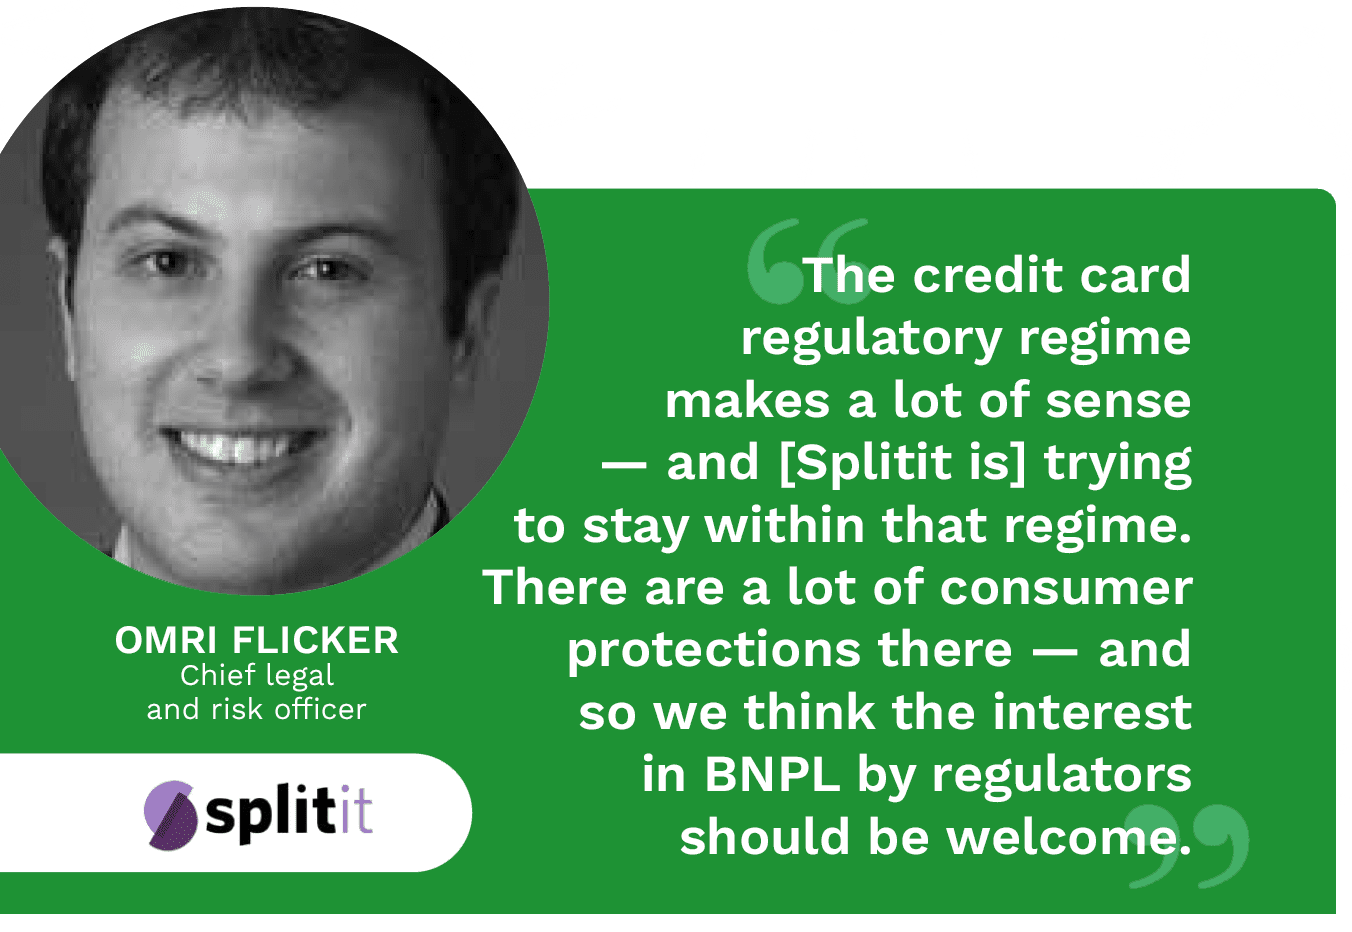 PYMNTS interviews Omri Flicker, chief legal and risk officer at Splitit, about why BNPL needs to have regulatory oversight.